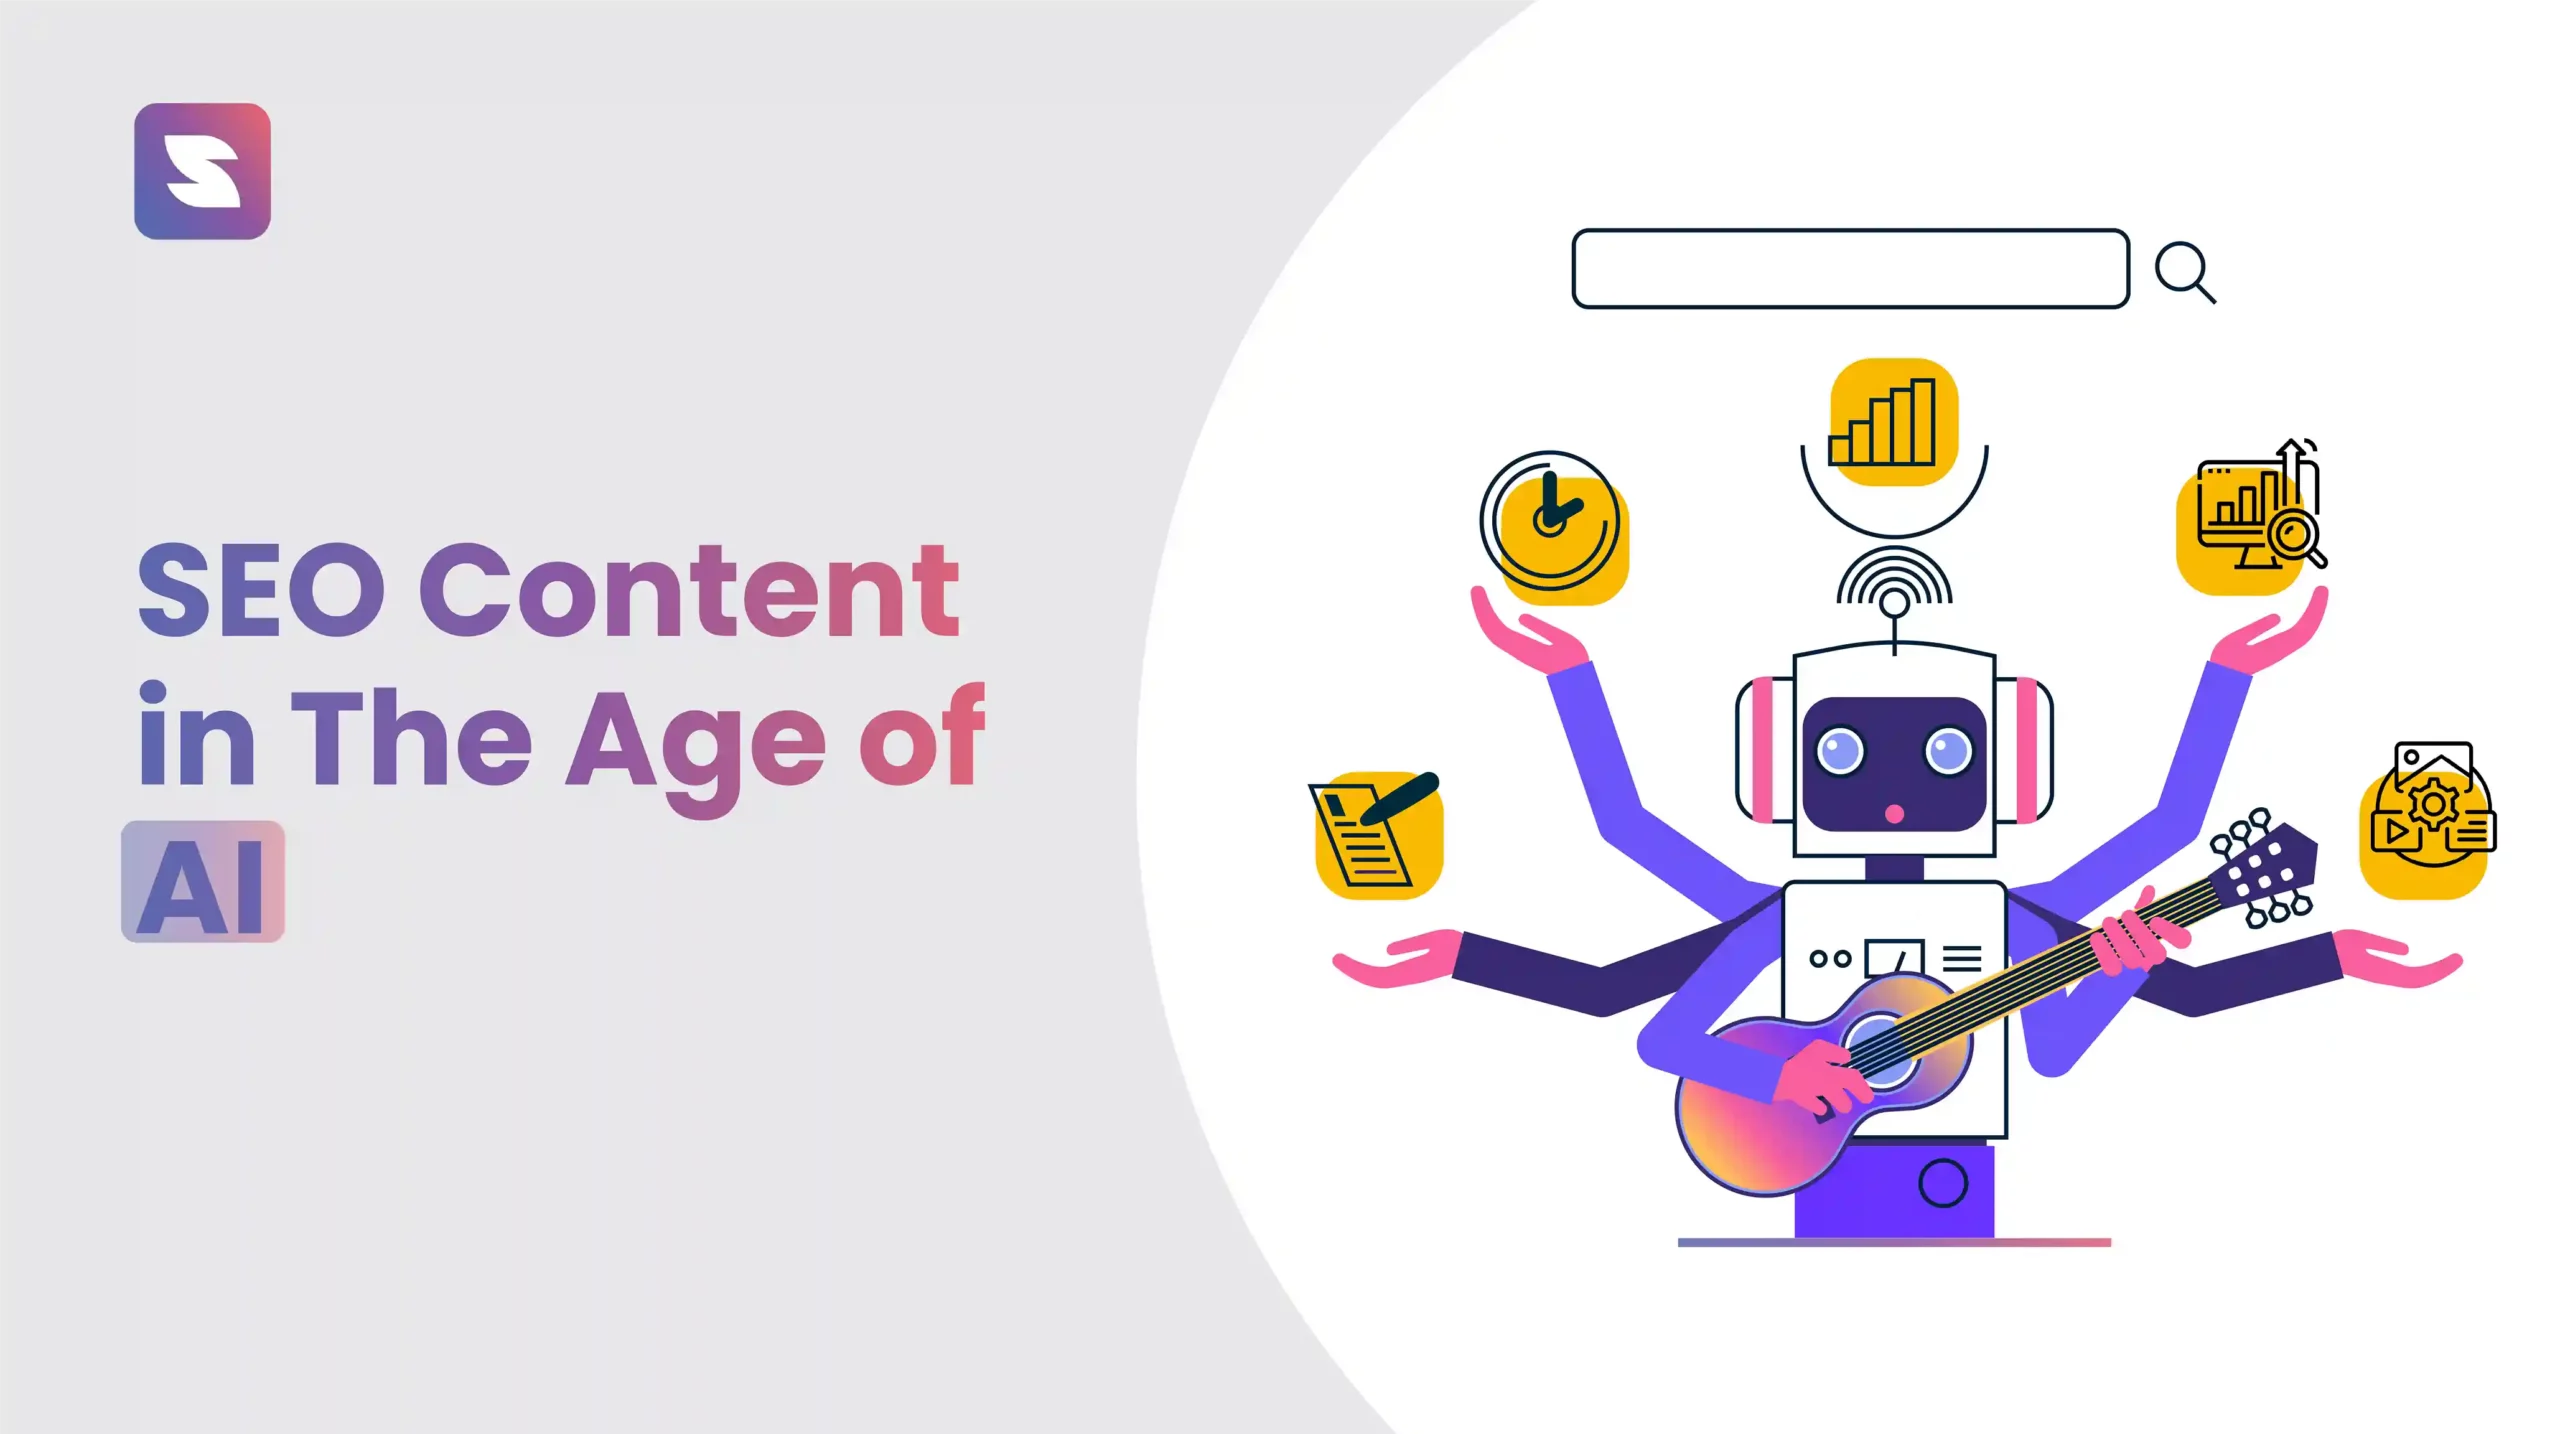 SEO Content in The Age of AI